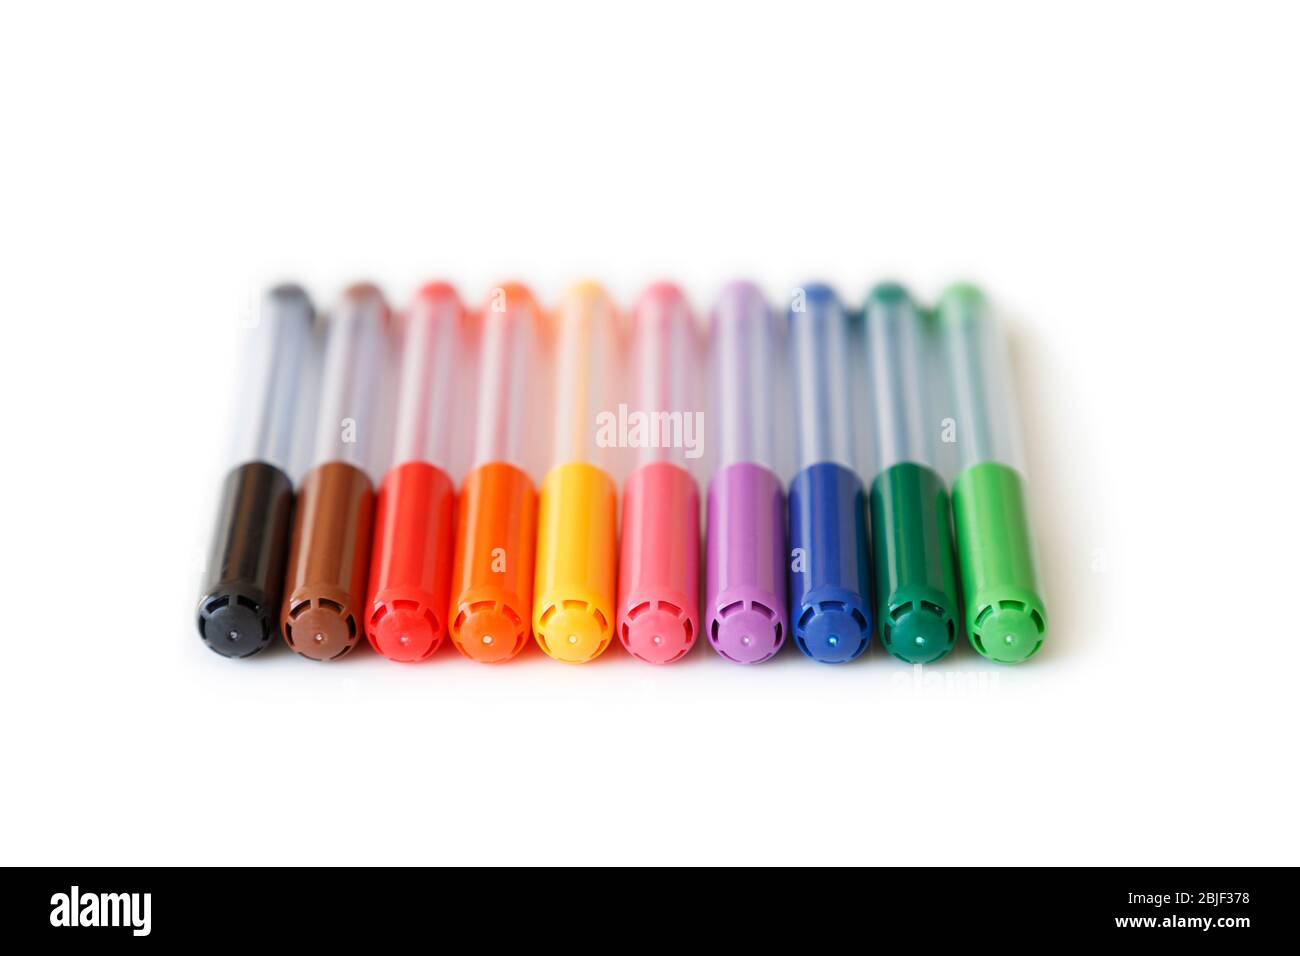 Close-up of set of colorful rainbow colored marker pens in a row, low angle view. Isolated on white background with clipping path. Stock Photo